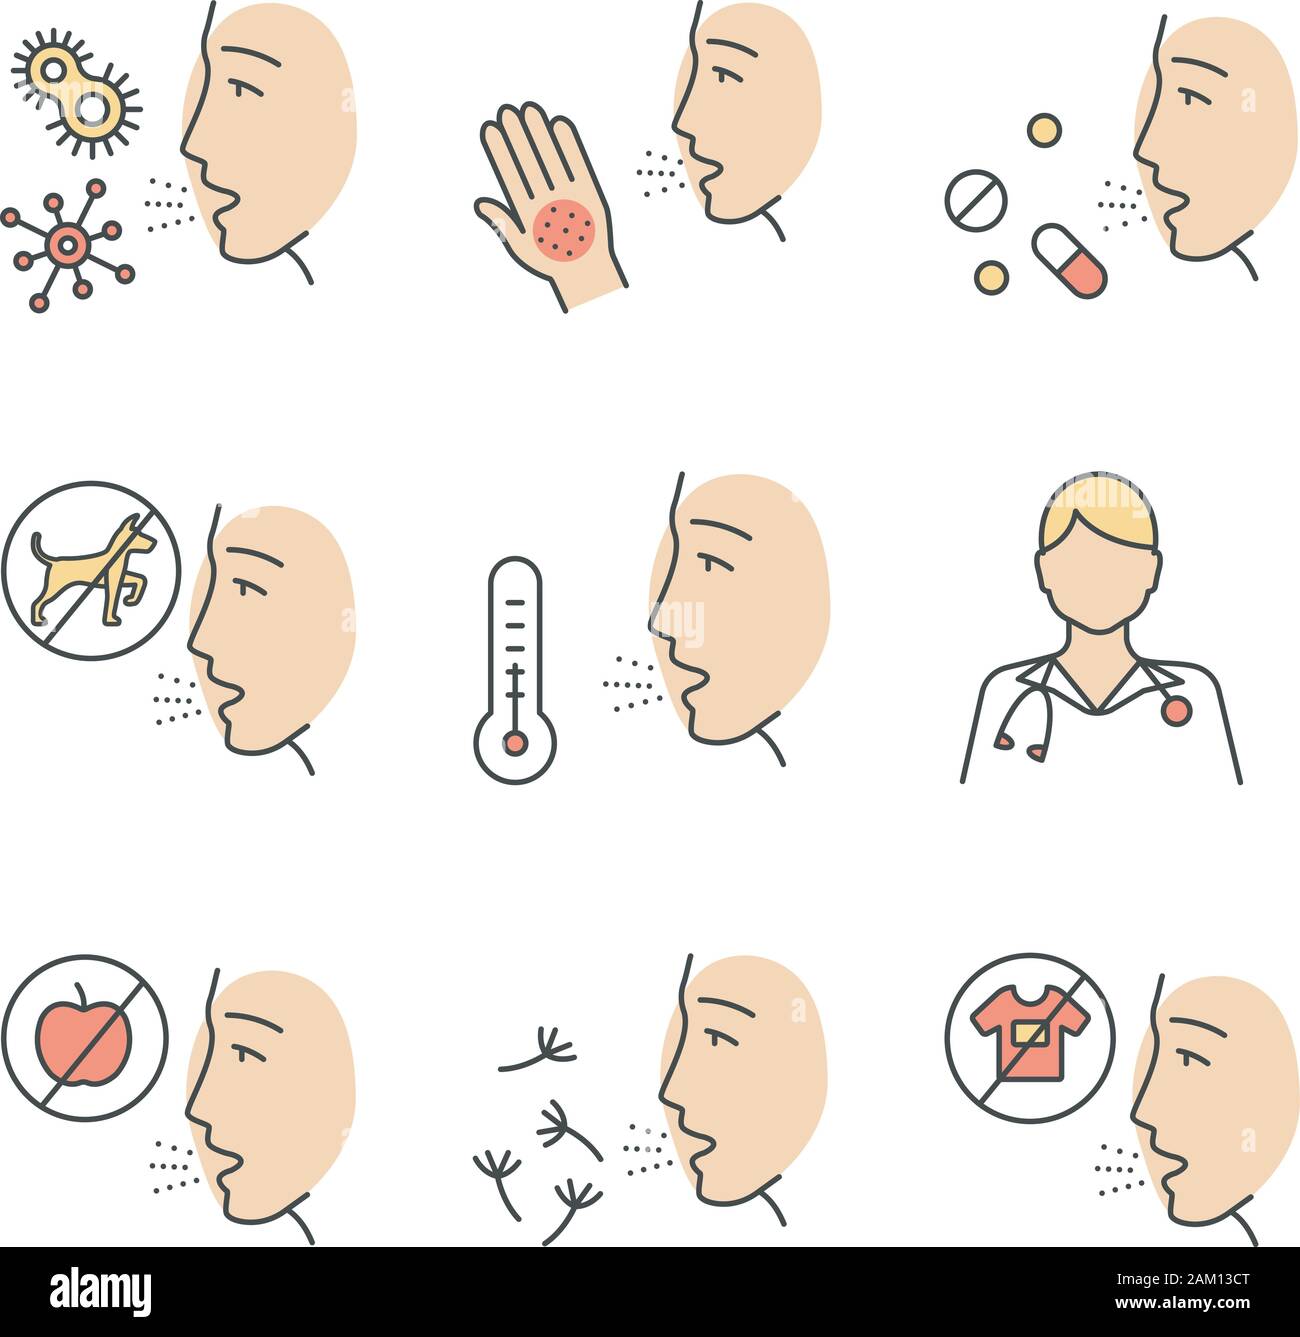 Allergies color icons set. Contact, food, respiratory diseases. Allergen sources. Diagnosis and medication. Hypersensitivity of immune system. Medical Stock Vector